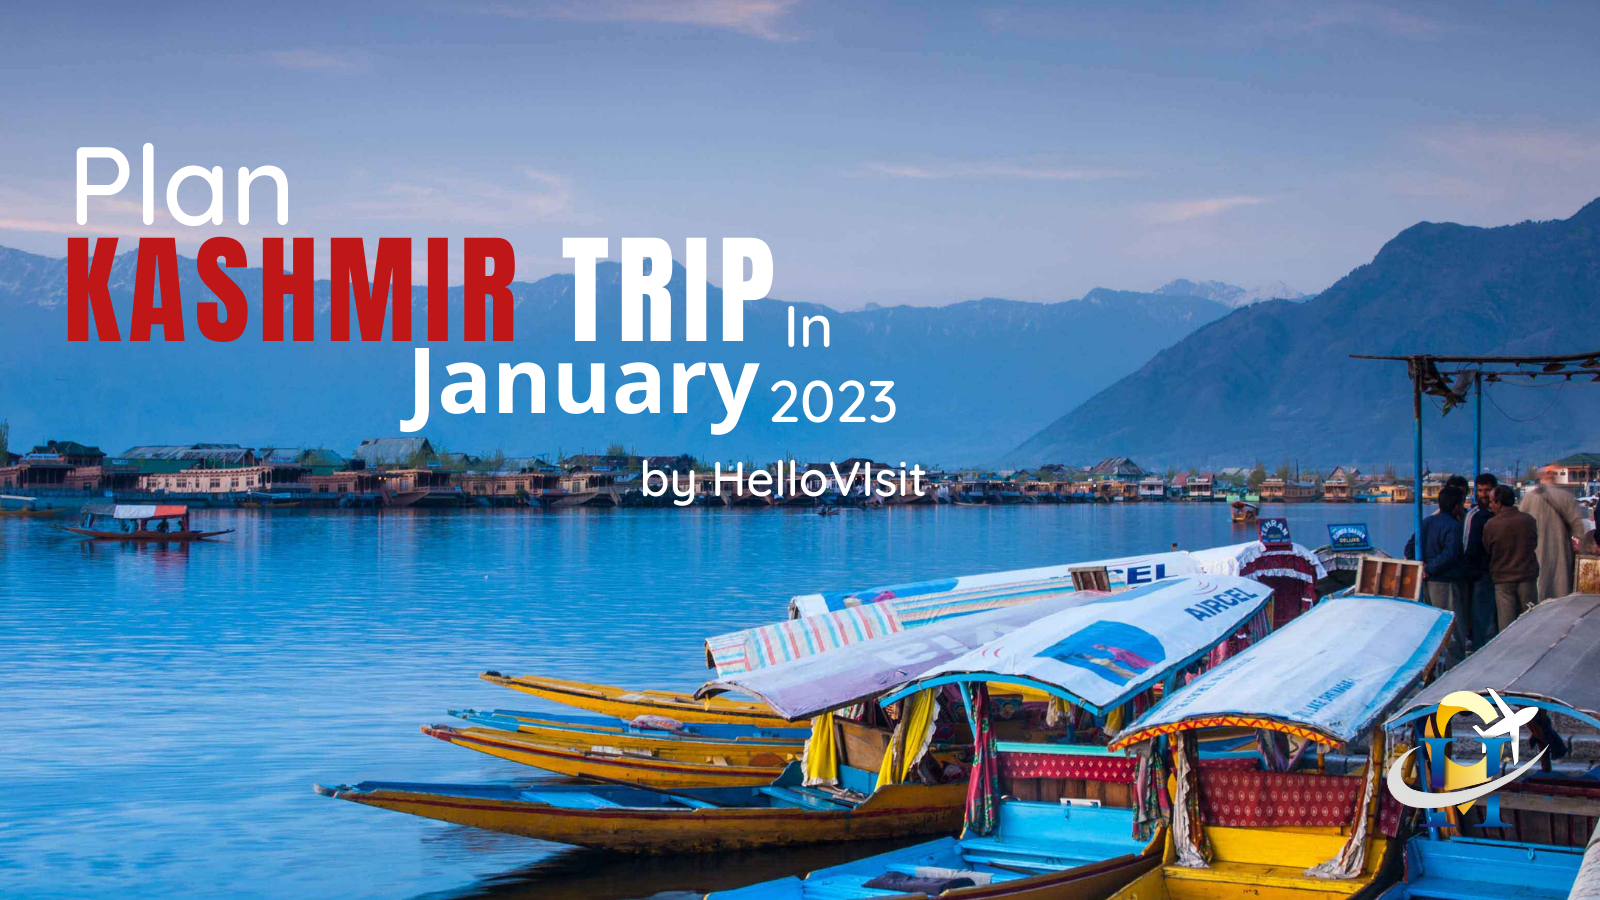 Kashmir Trip in January 2023 Plan Tour to the Sensational Valley